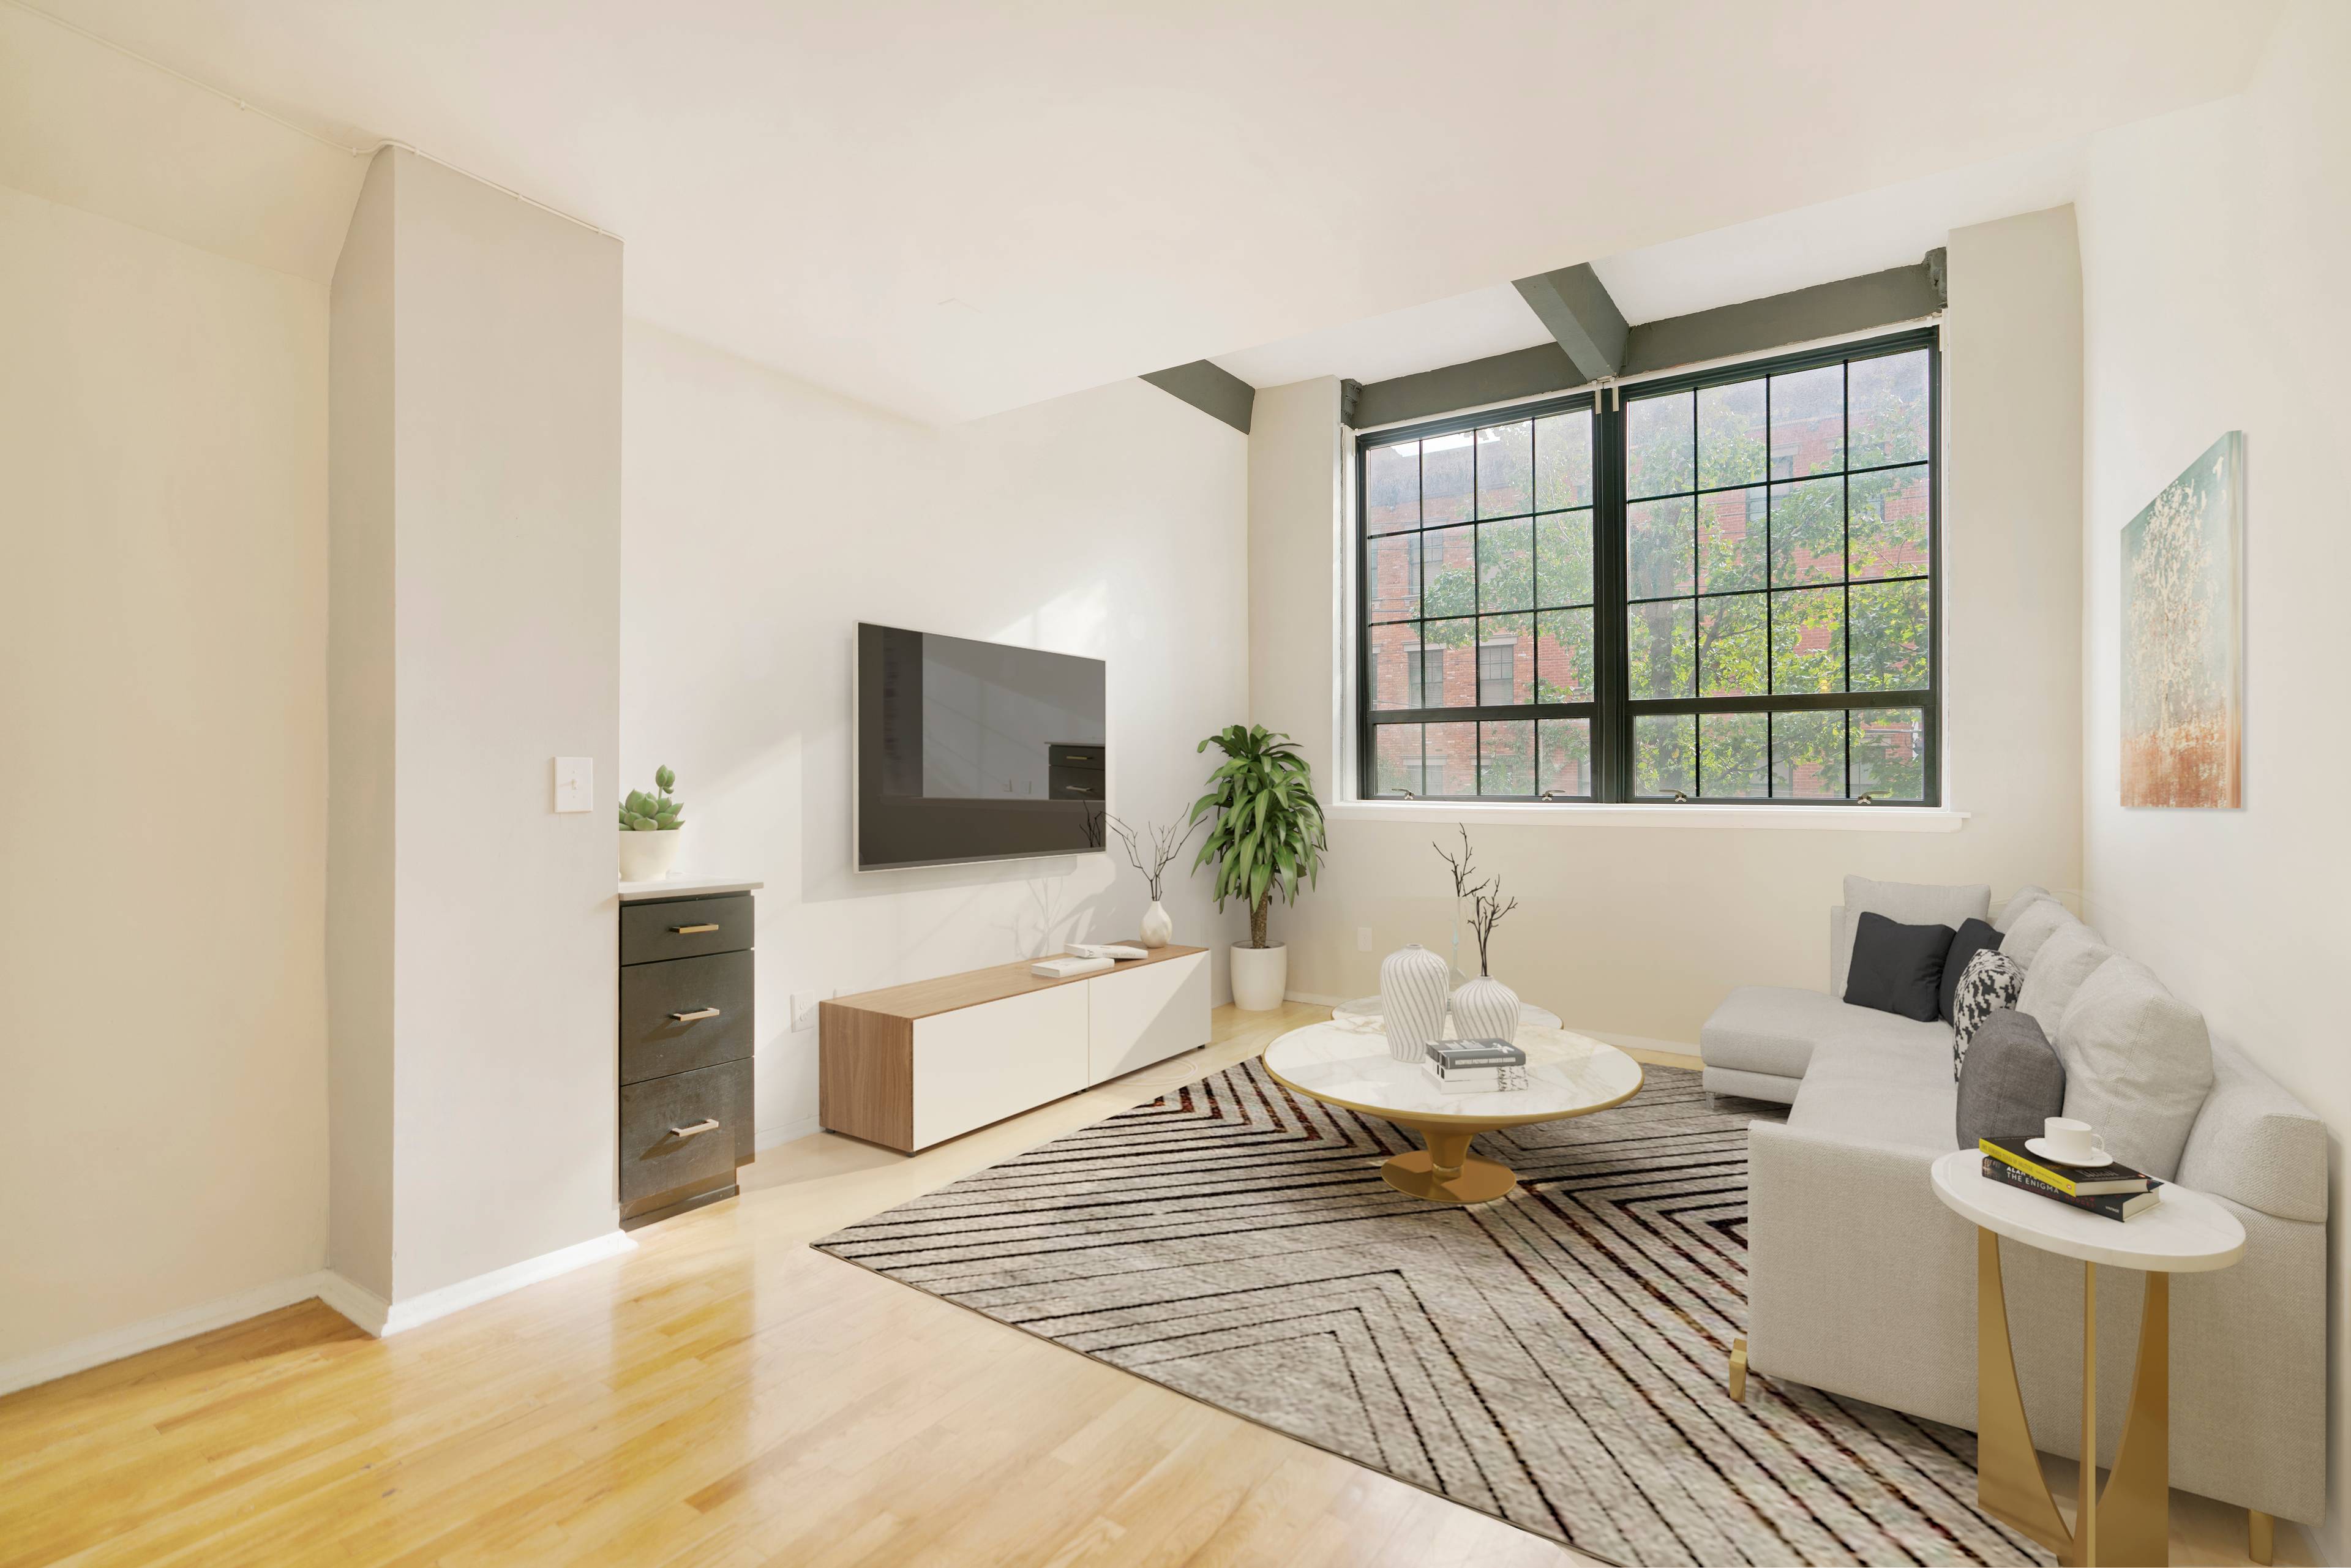 Beautiful Open and Spacious 1 Bedroom 1.5 Bathroom Soho Loft Duplex with Open California King Size Bedroom! Located at the Grand Adams in Downtown Hoboken! 2 Months Free on a 14 Month Lease!